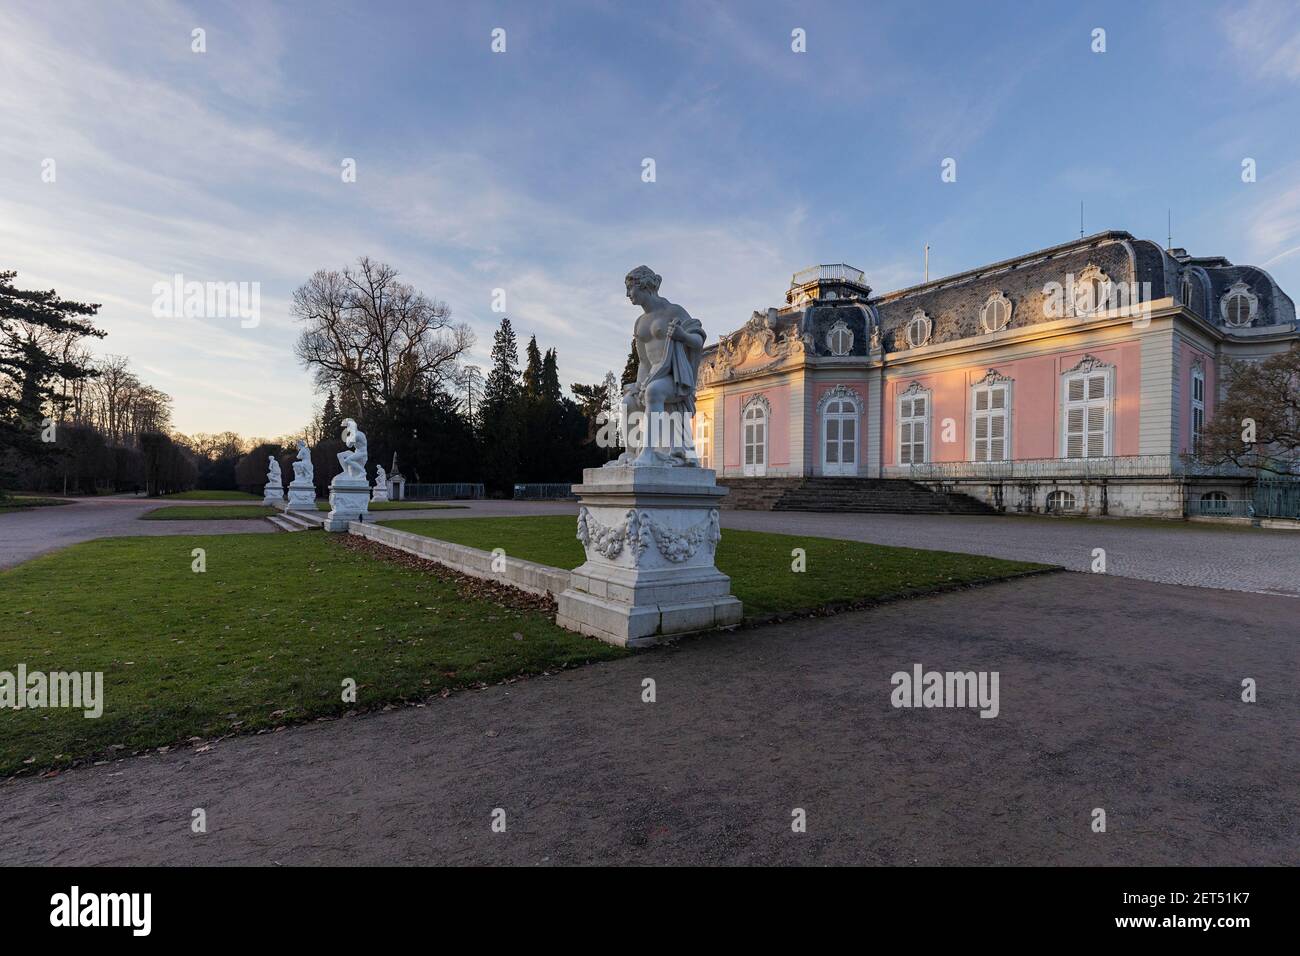 Duesseldorf-Benrath - View to rear side of Castle Benrath with Statues, North Rhine Westphalia, Germany, 06.01.2020 Stock Photo